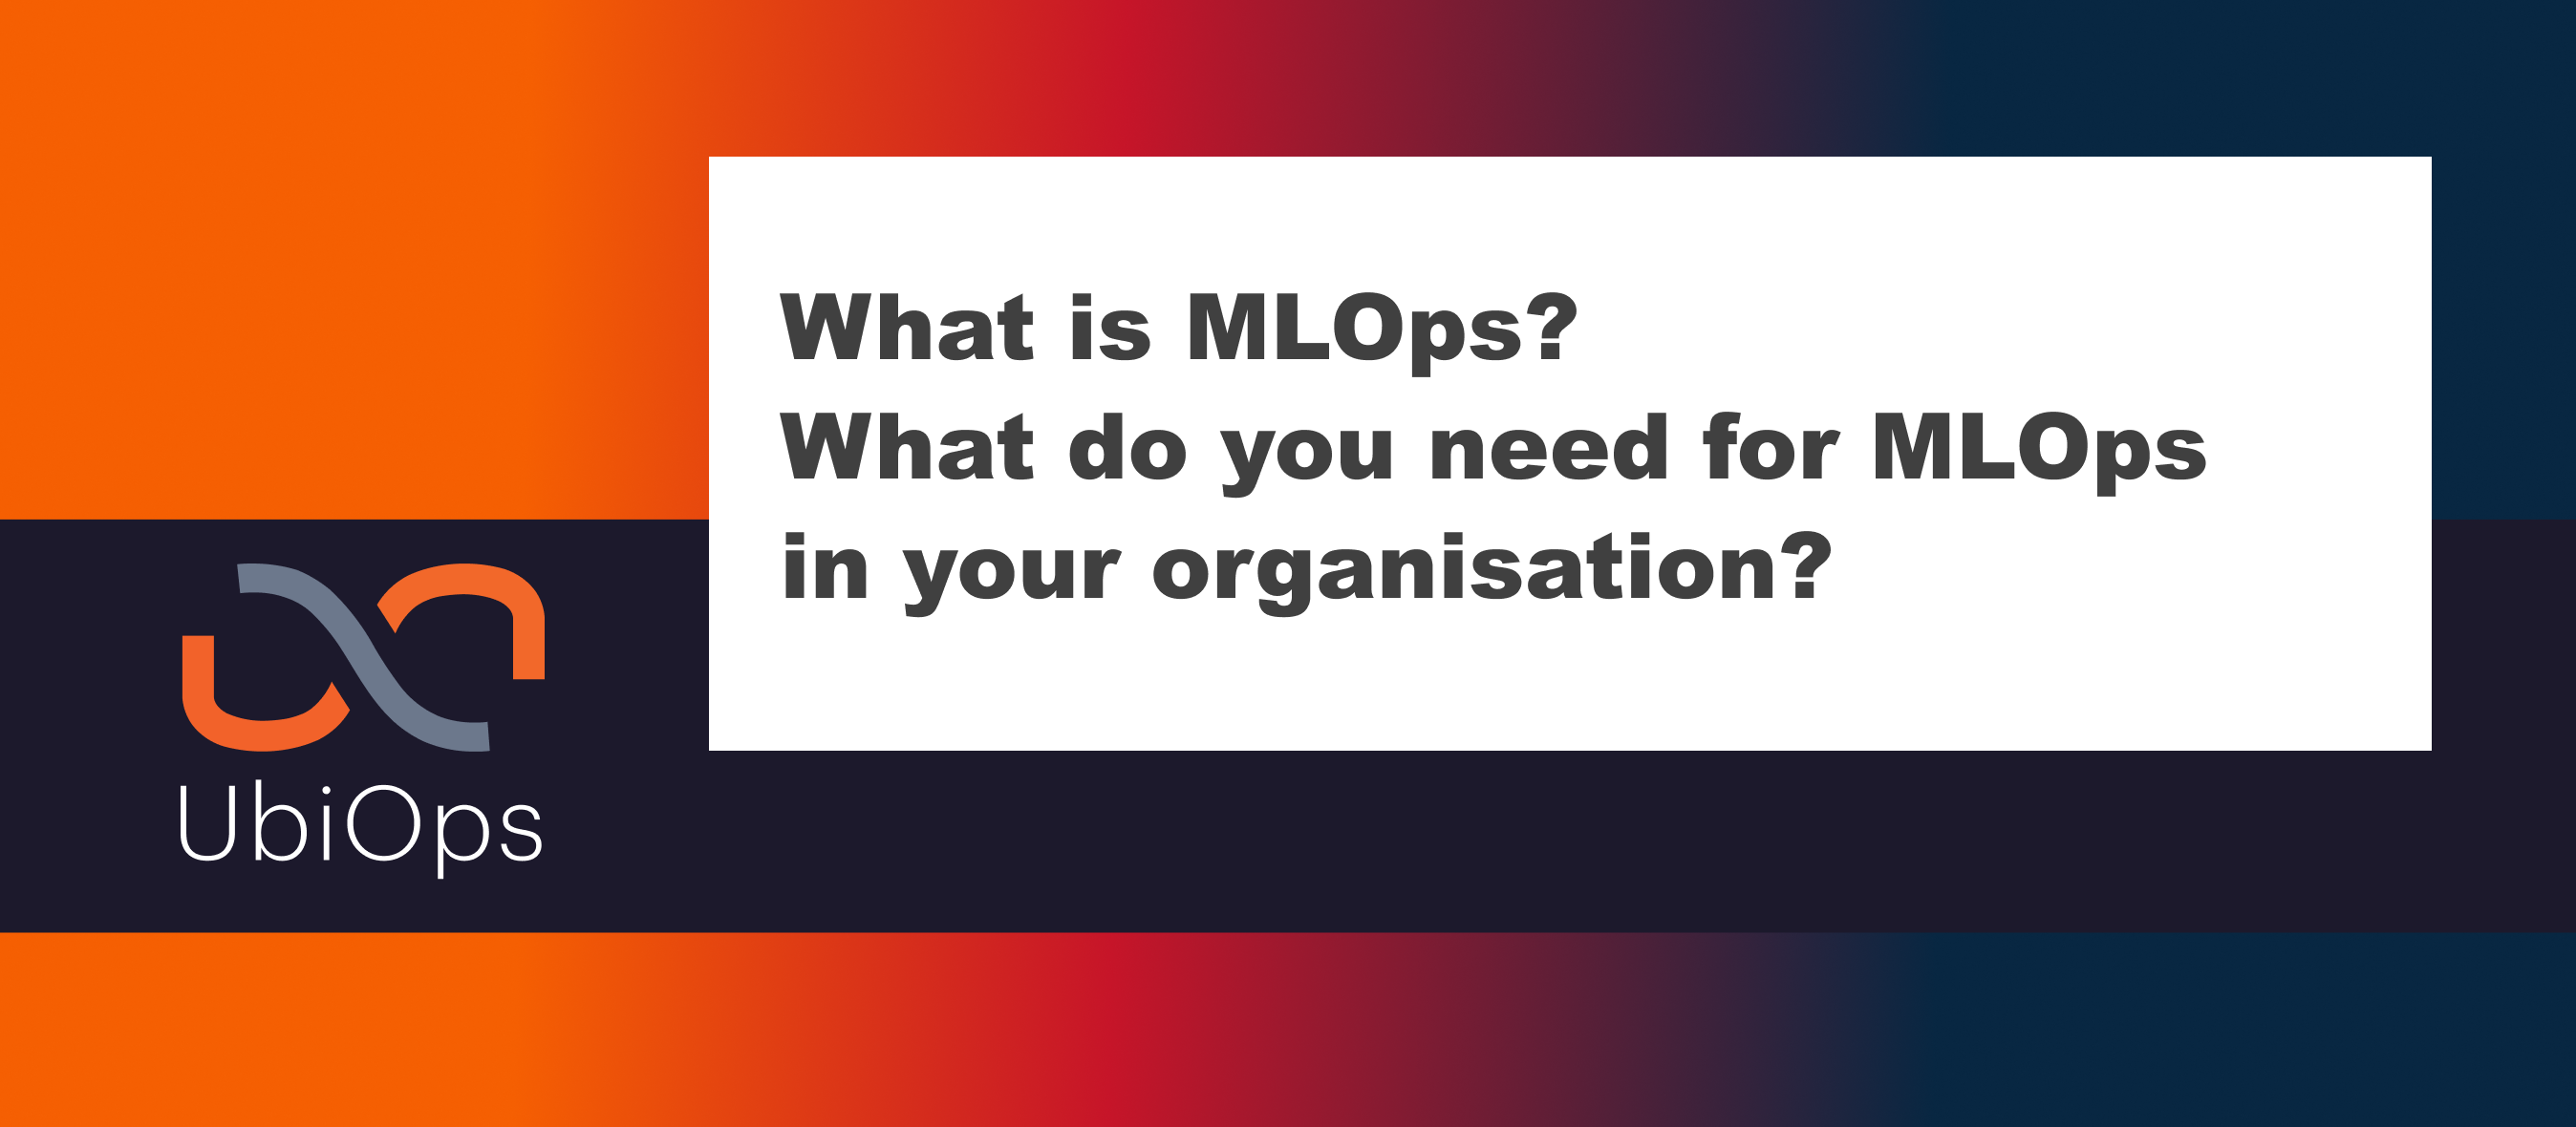 What id MLops? Why do you need MLOps?